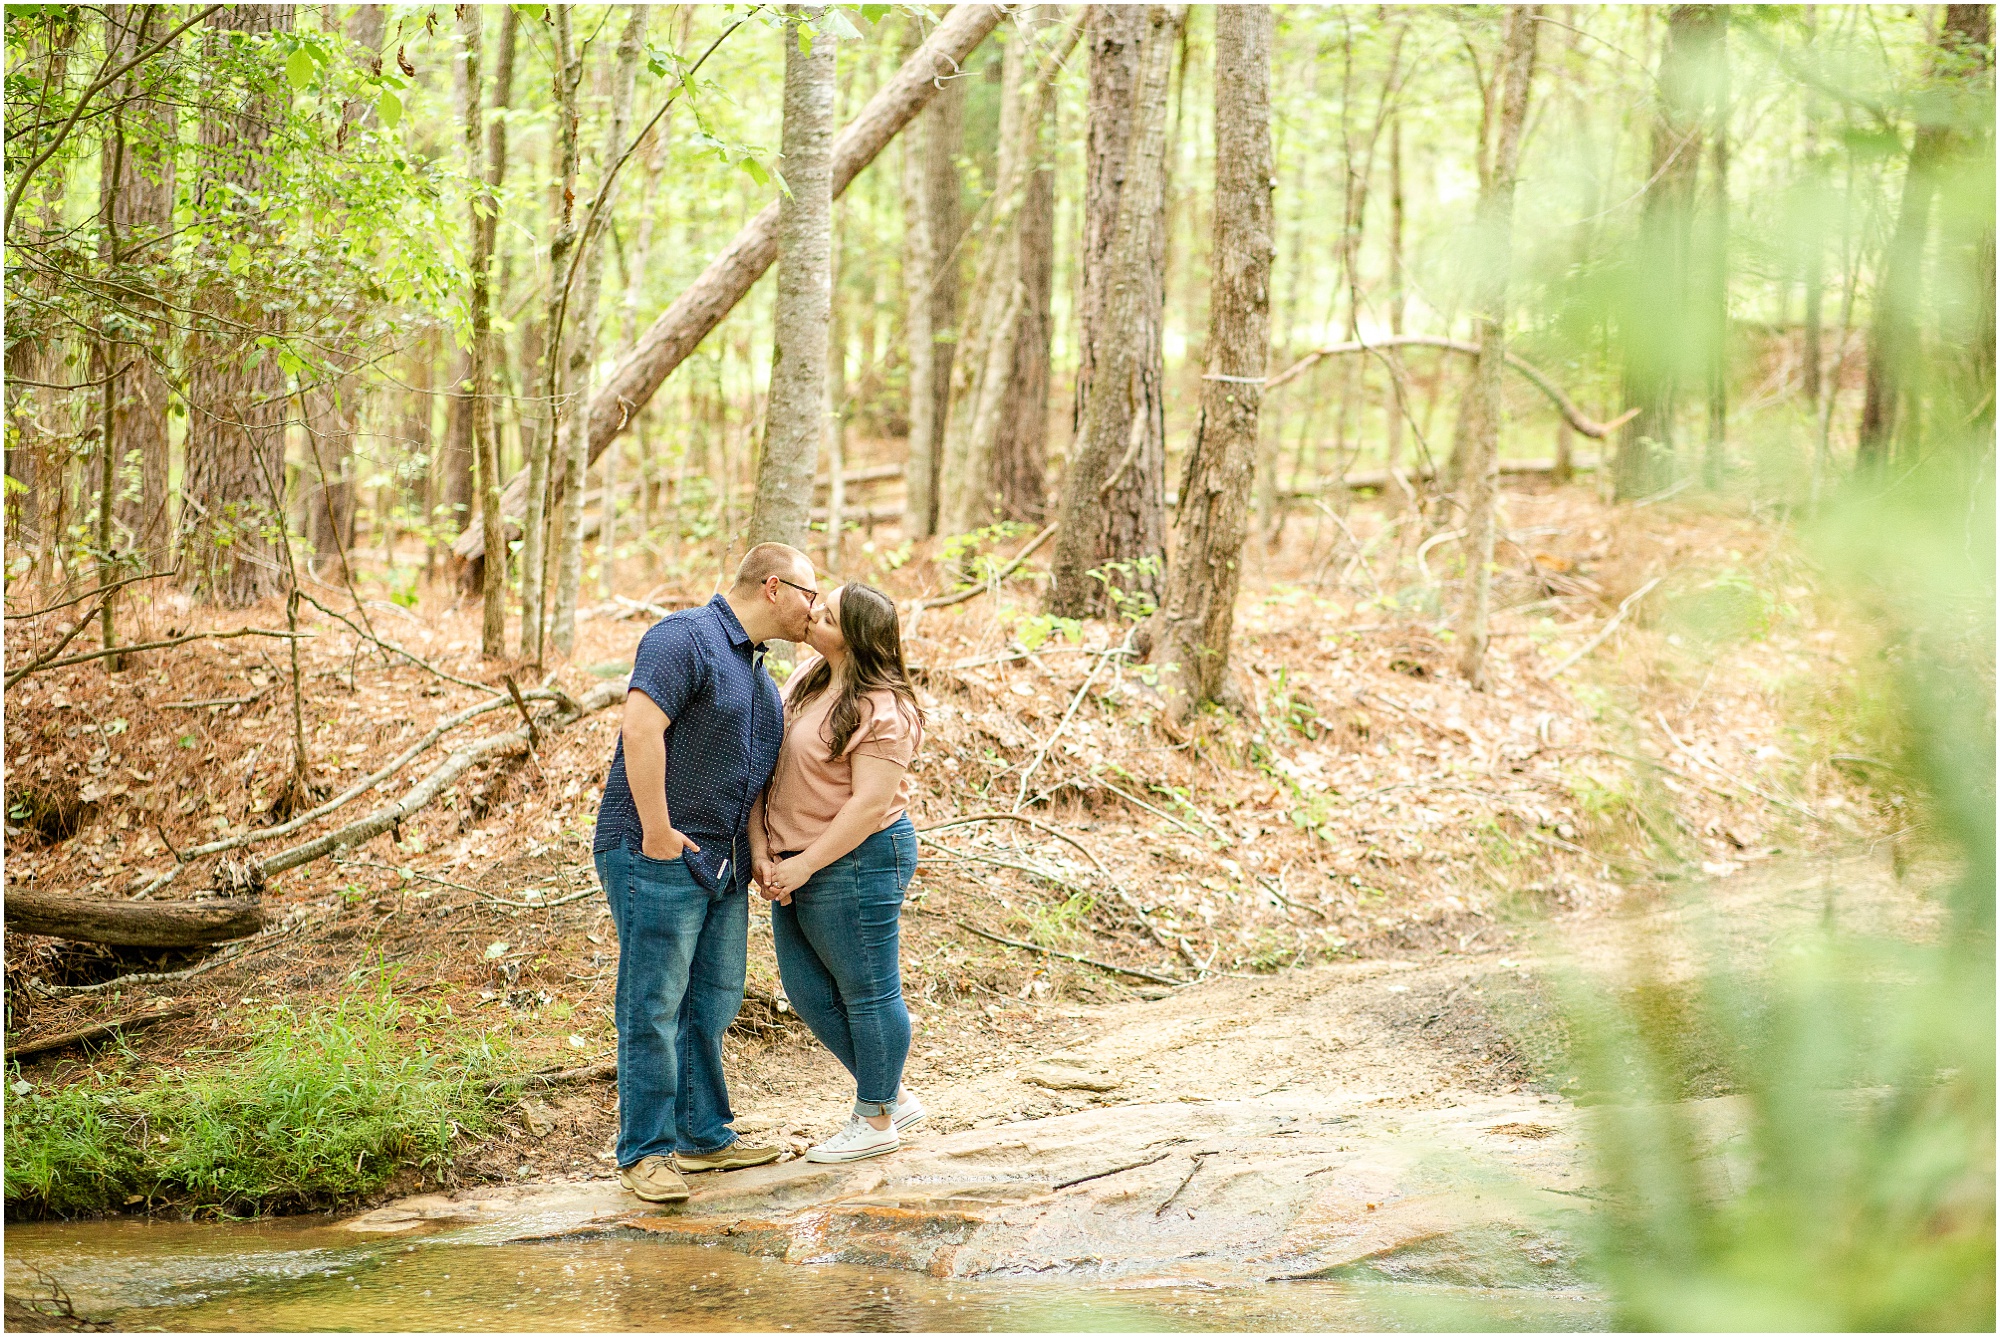 Kissing couple in the woods for photographs